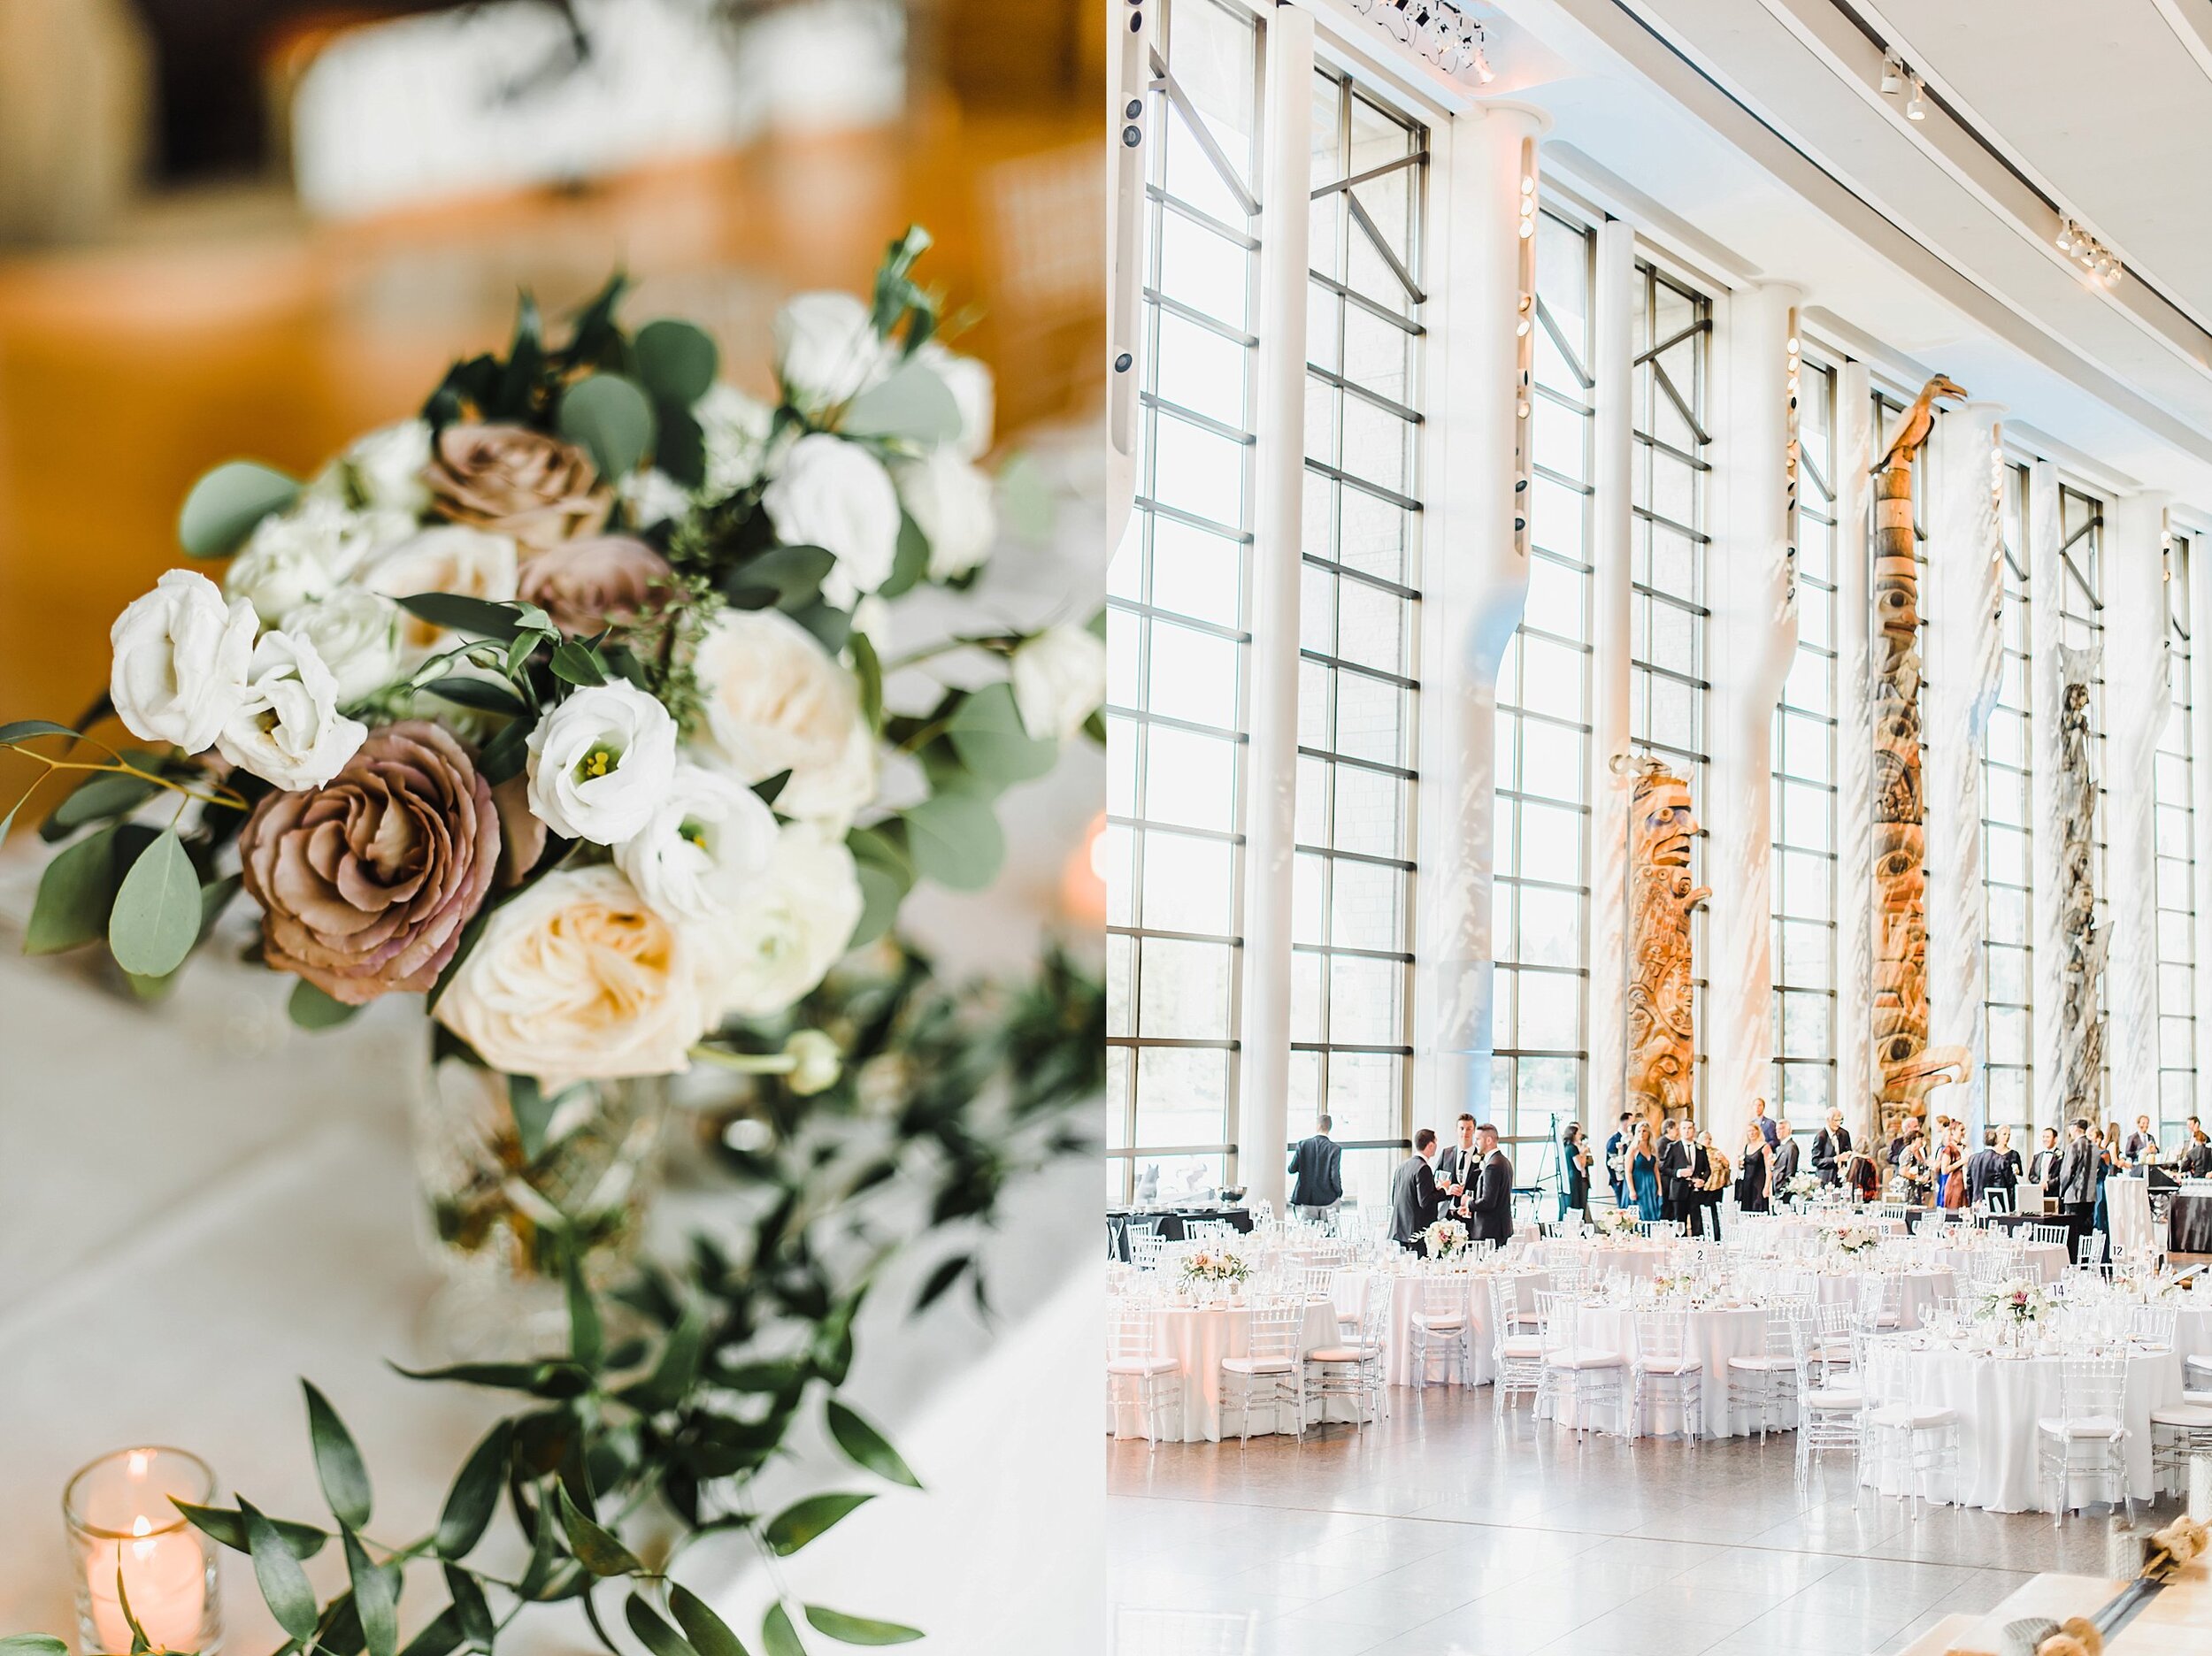  The Gathering Event Company’s work on the florals gave that elegant touch. 